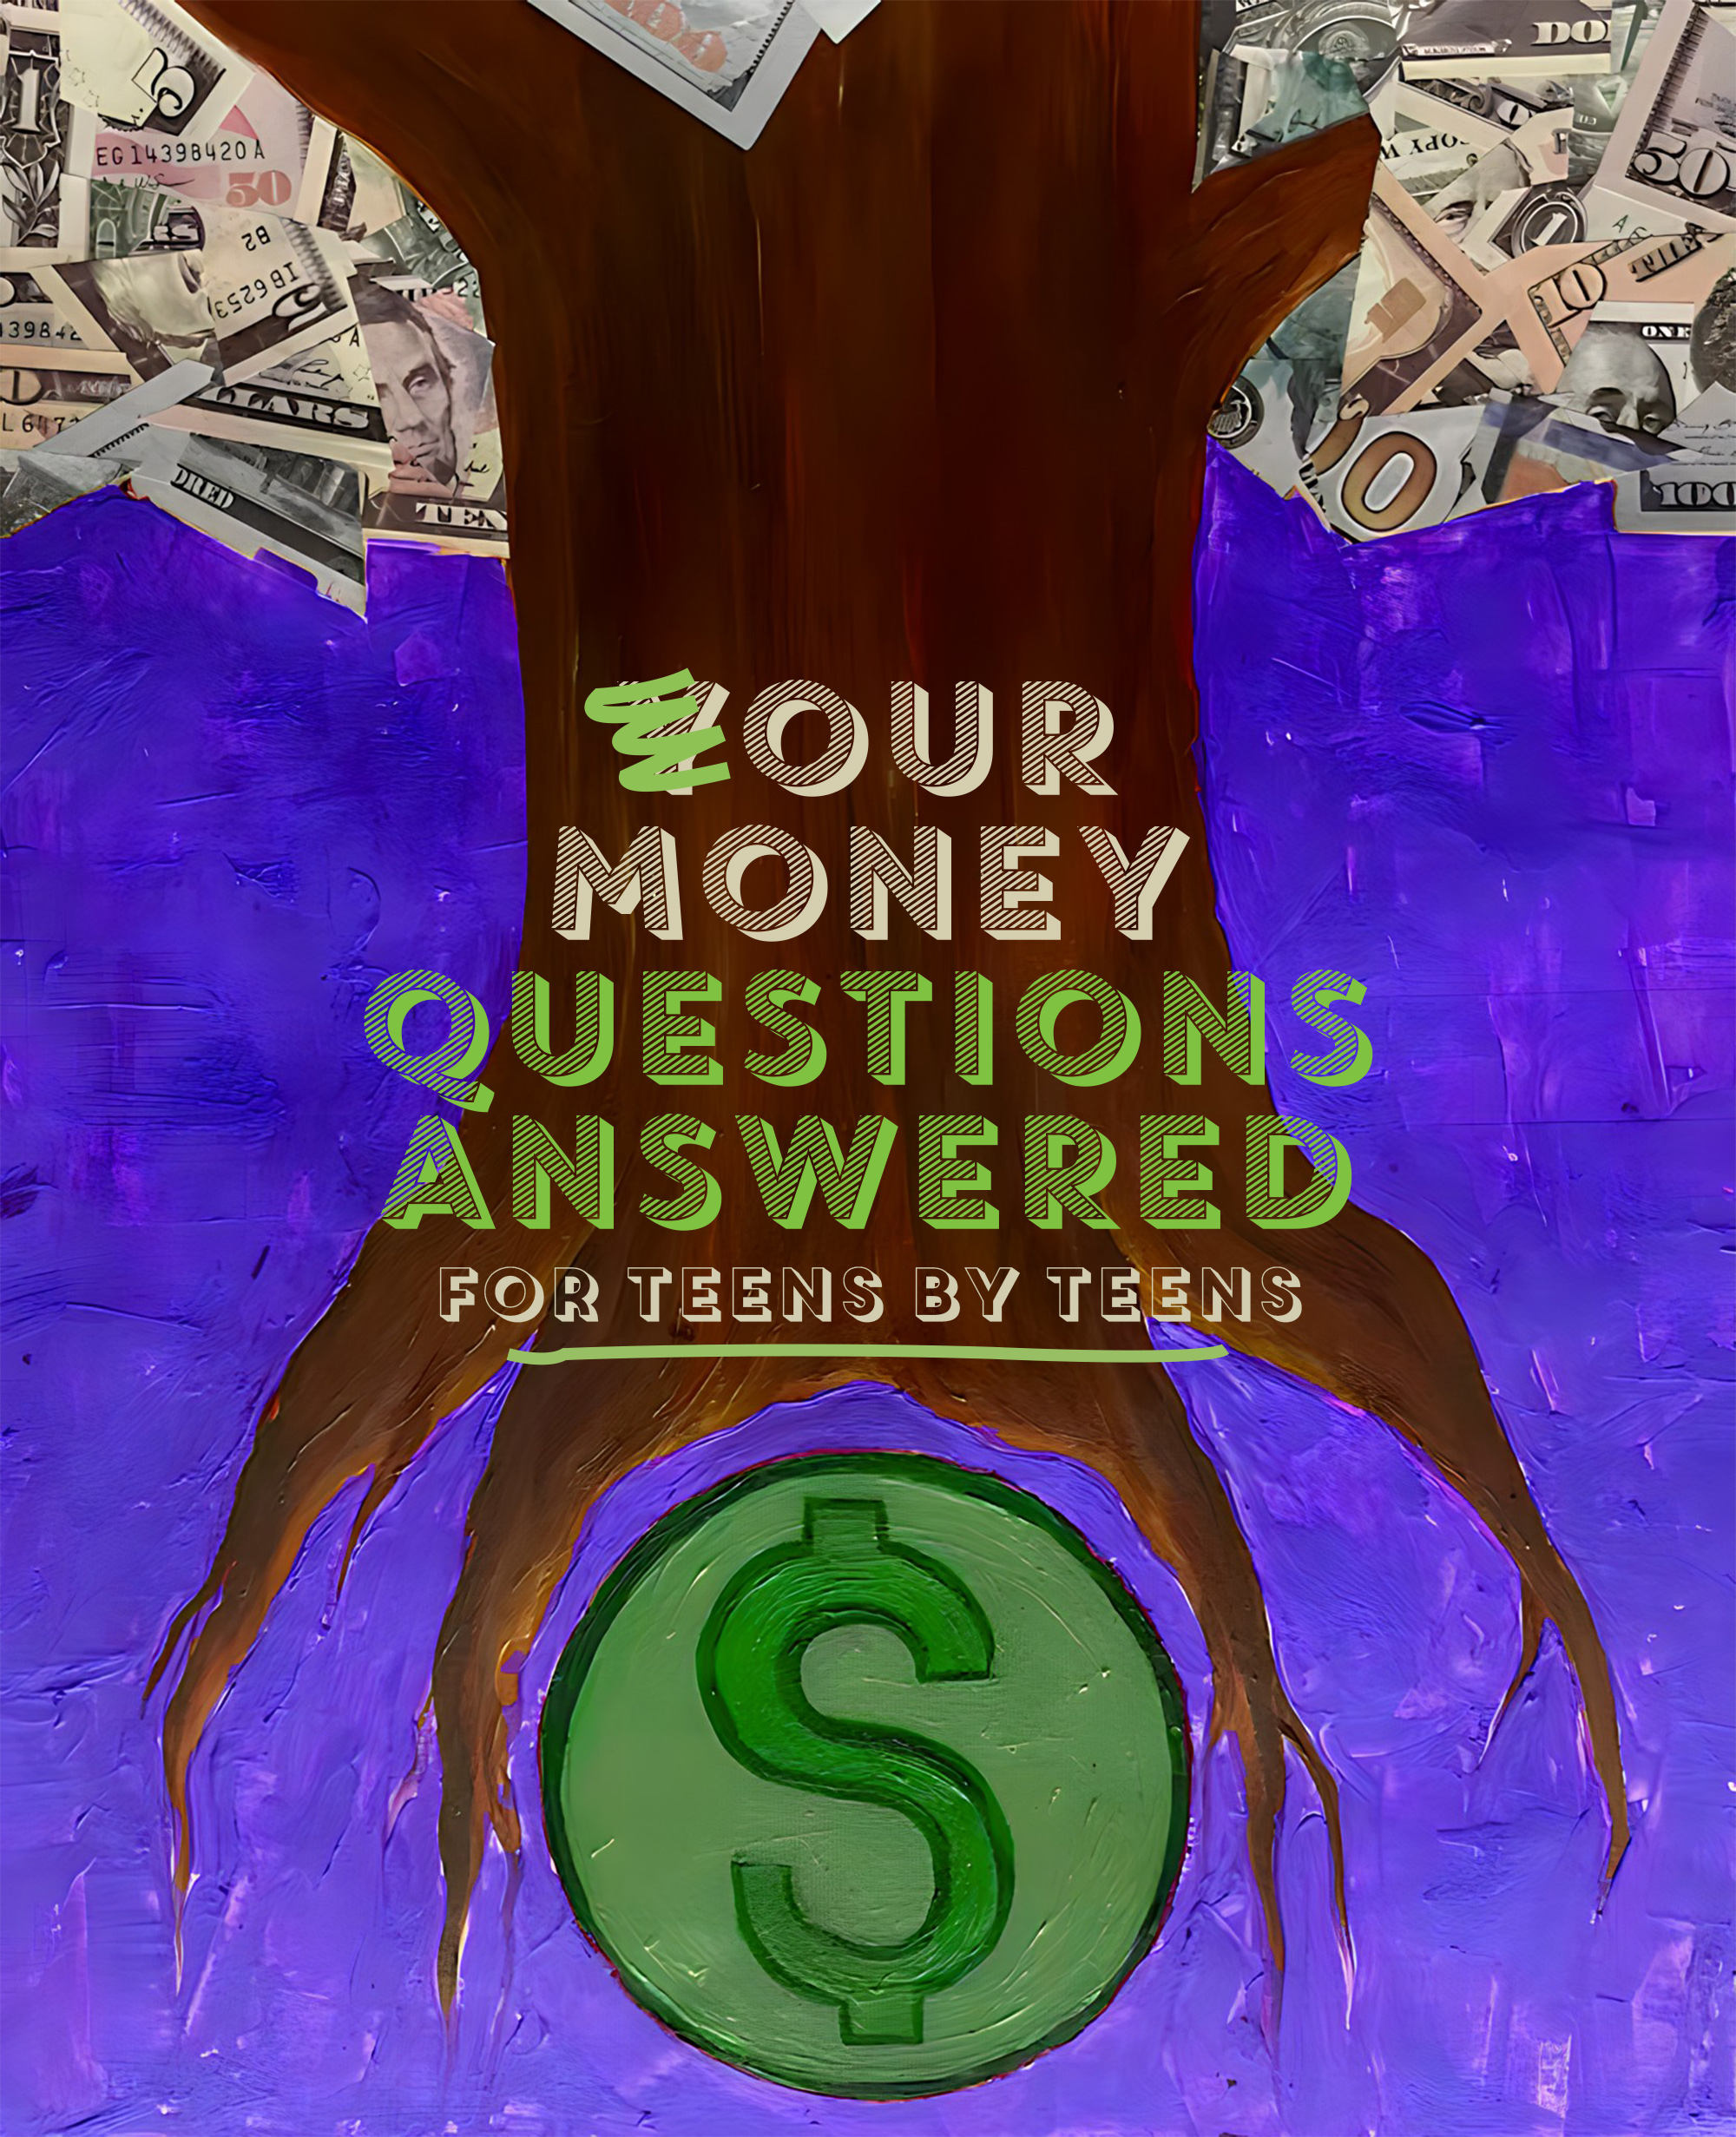 We're teens, and we have questions about money